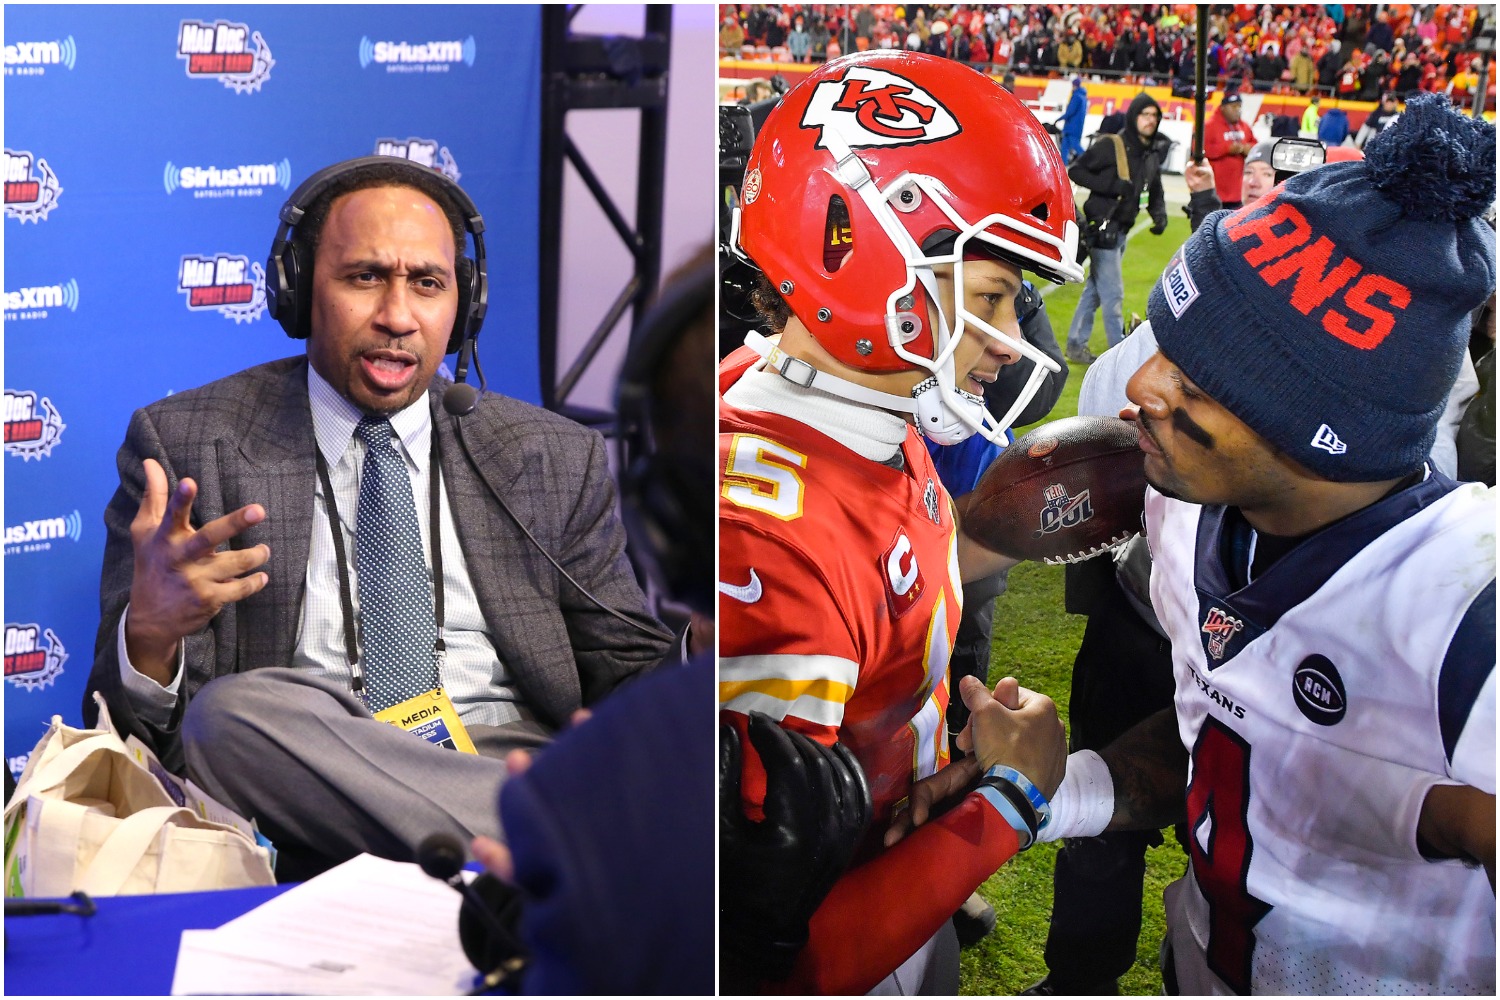 Stephen A. Smith got called out by a legendary NFL quarterback on Twitter after he made a disrespectful comment about Patrick Mahomes.